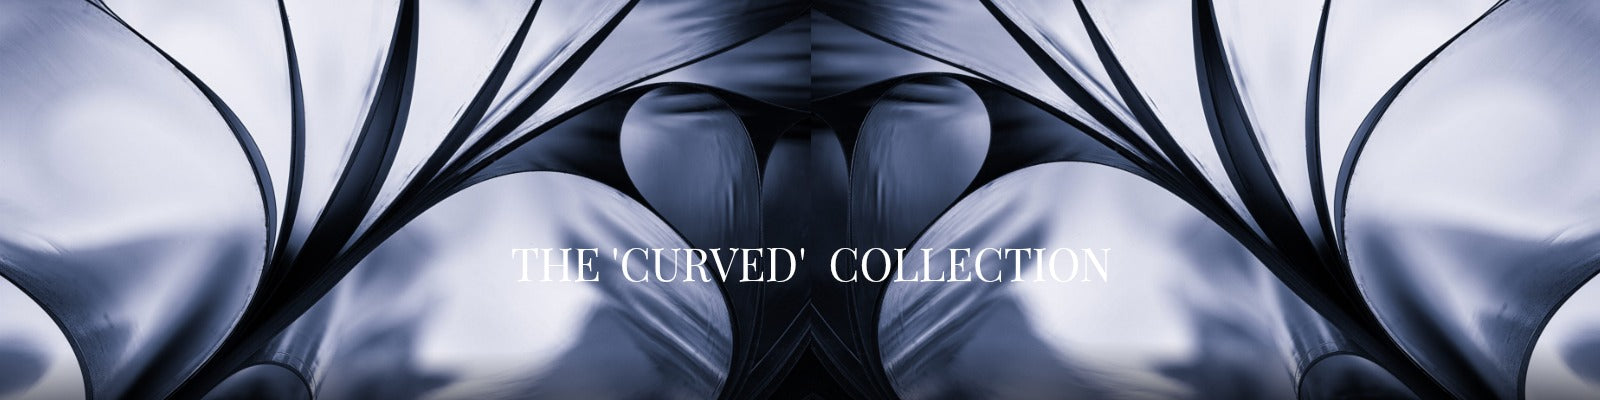 CURVED COLLECTION